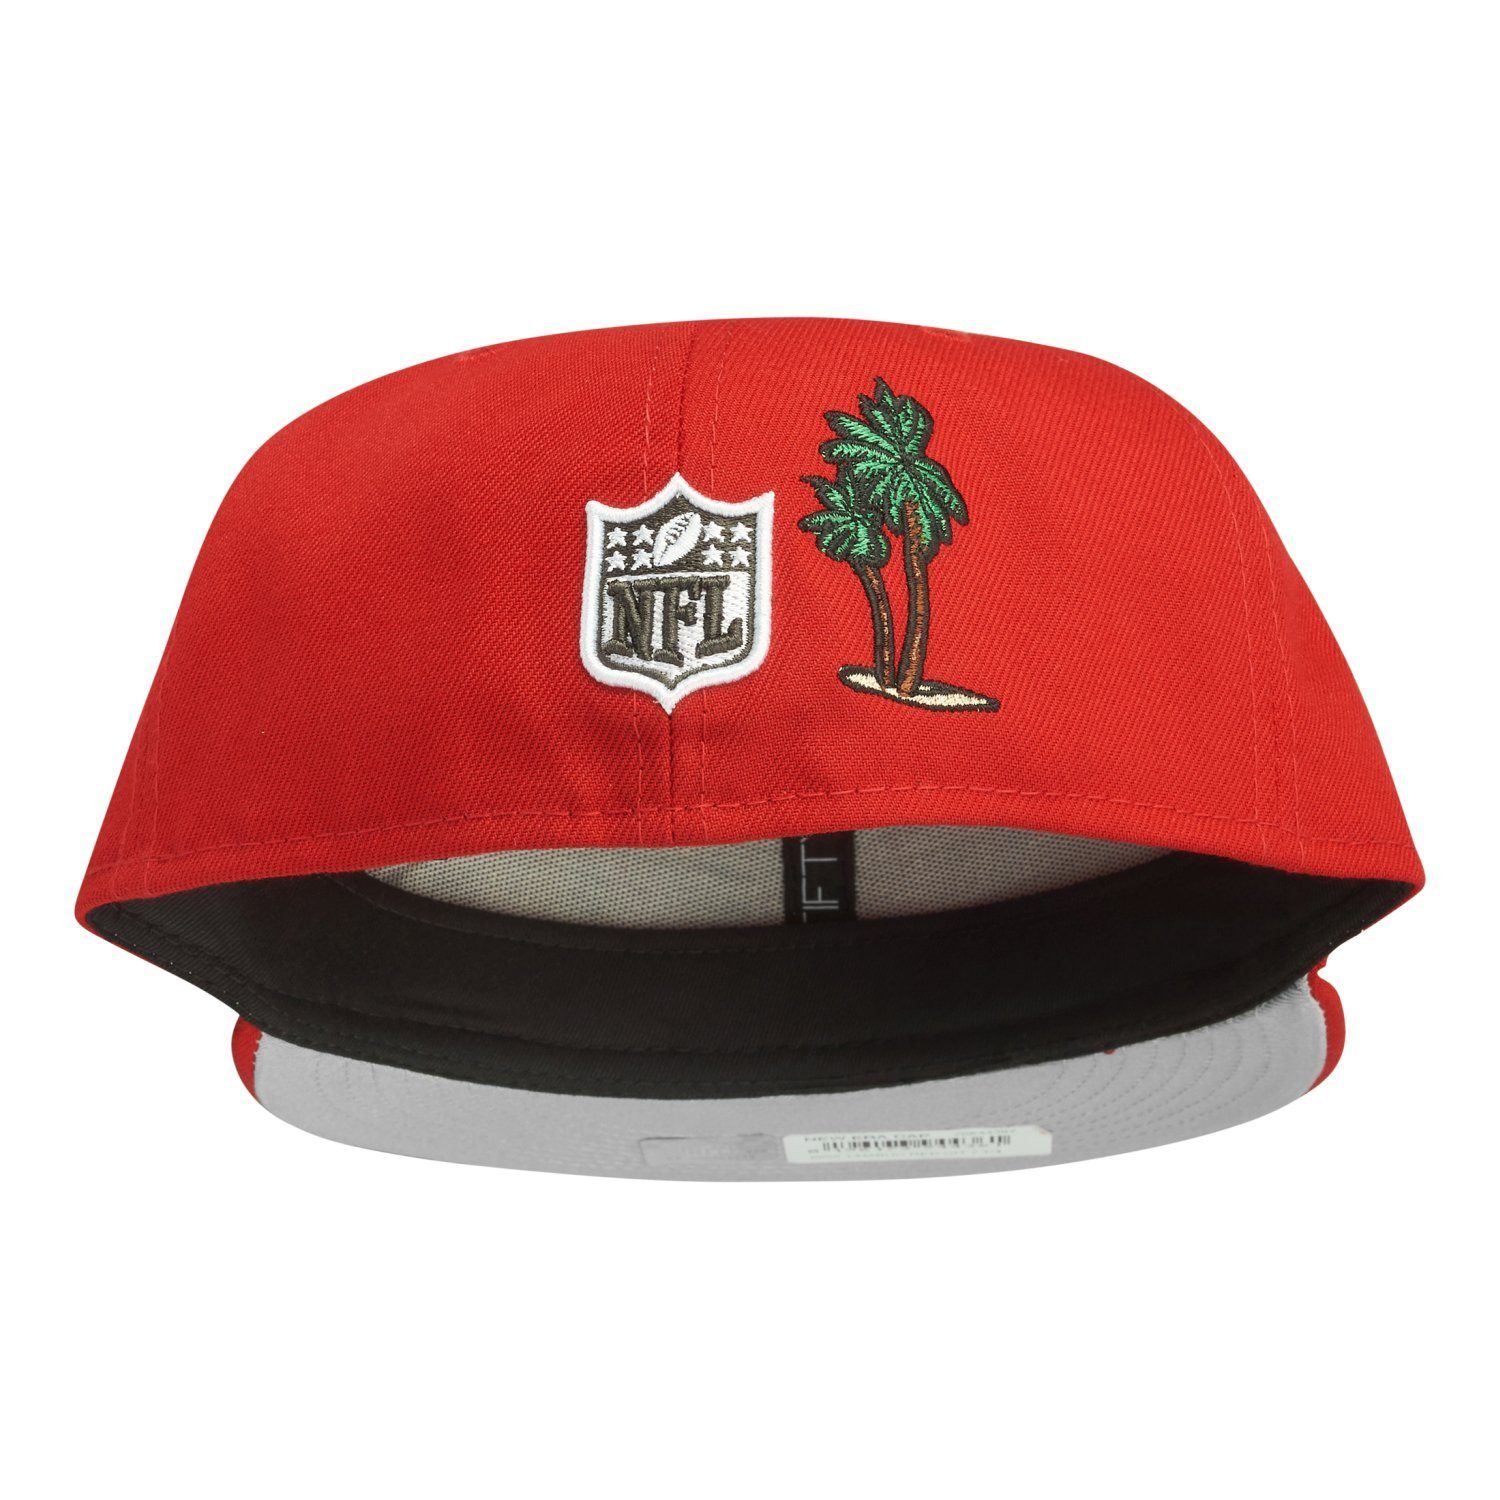 CITY Buccaneers New NFL Bay Fitted 59Fifty Cap Era Tampa